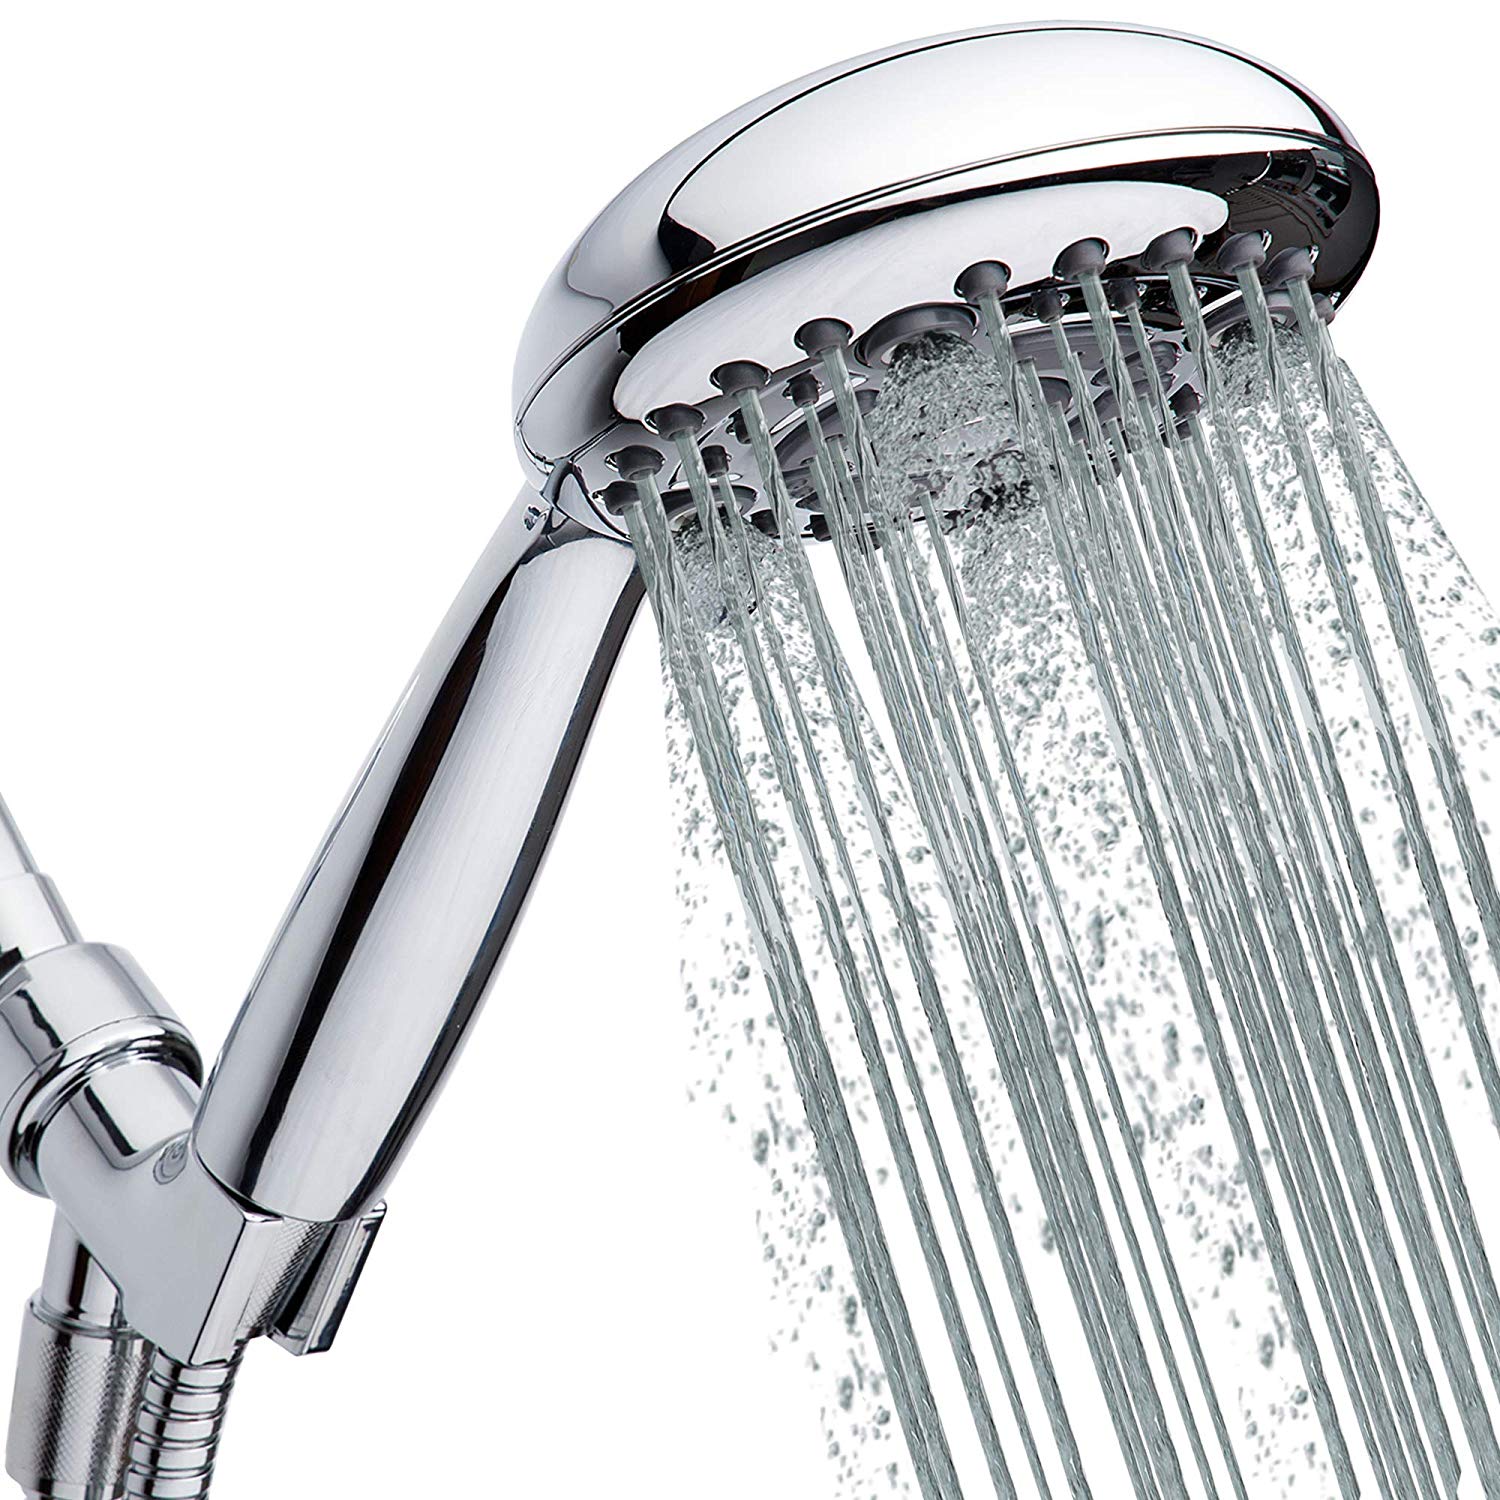 High Pressure Handheld Shower Head with Powerful Shower Spray against Low 